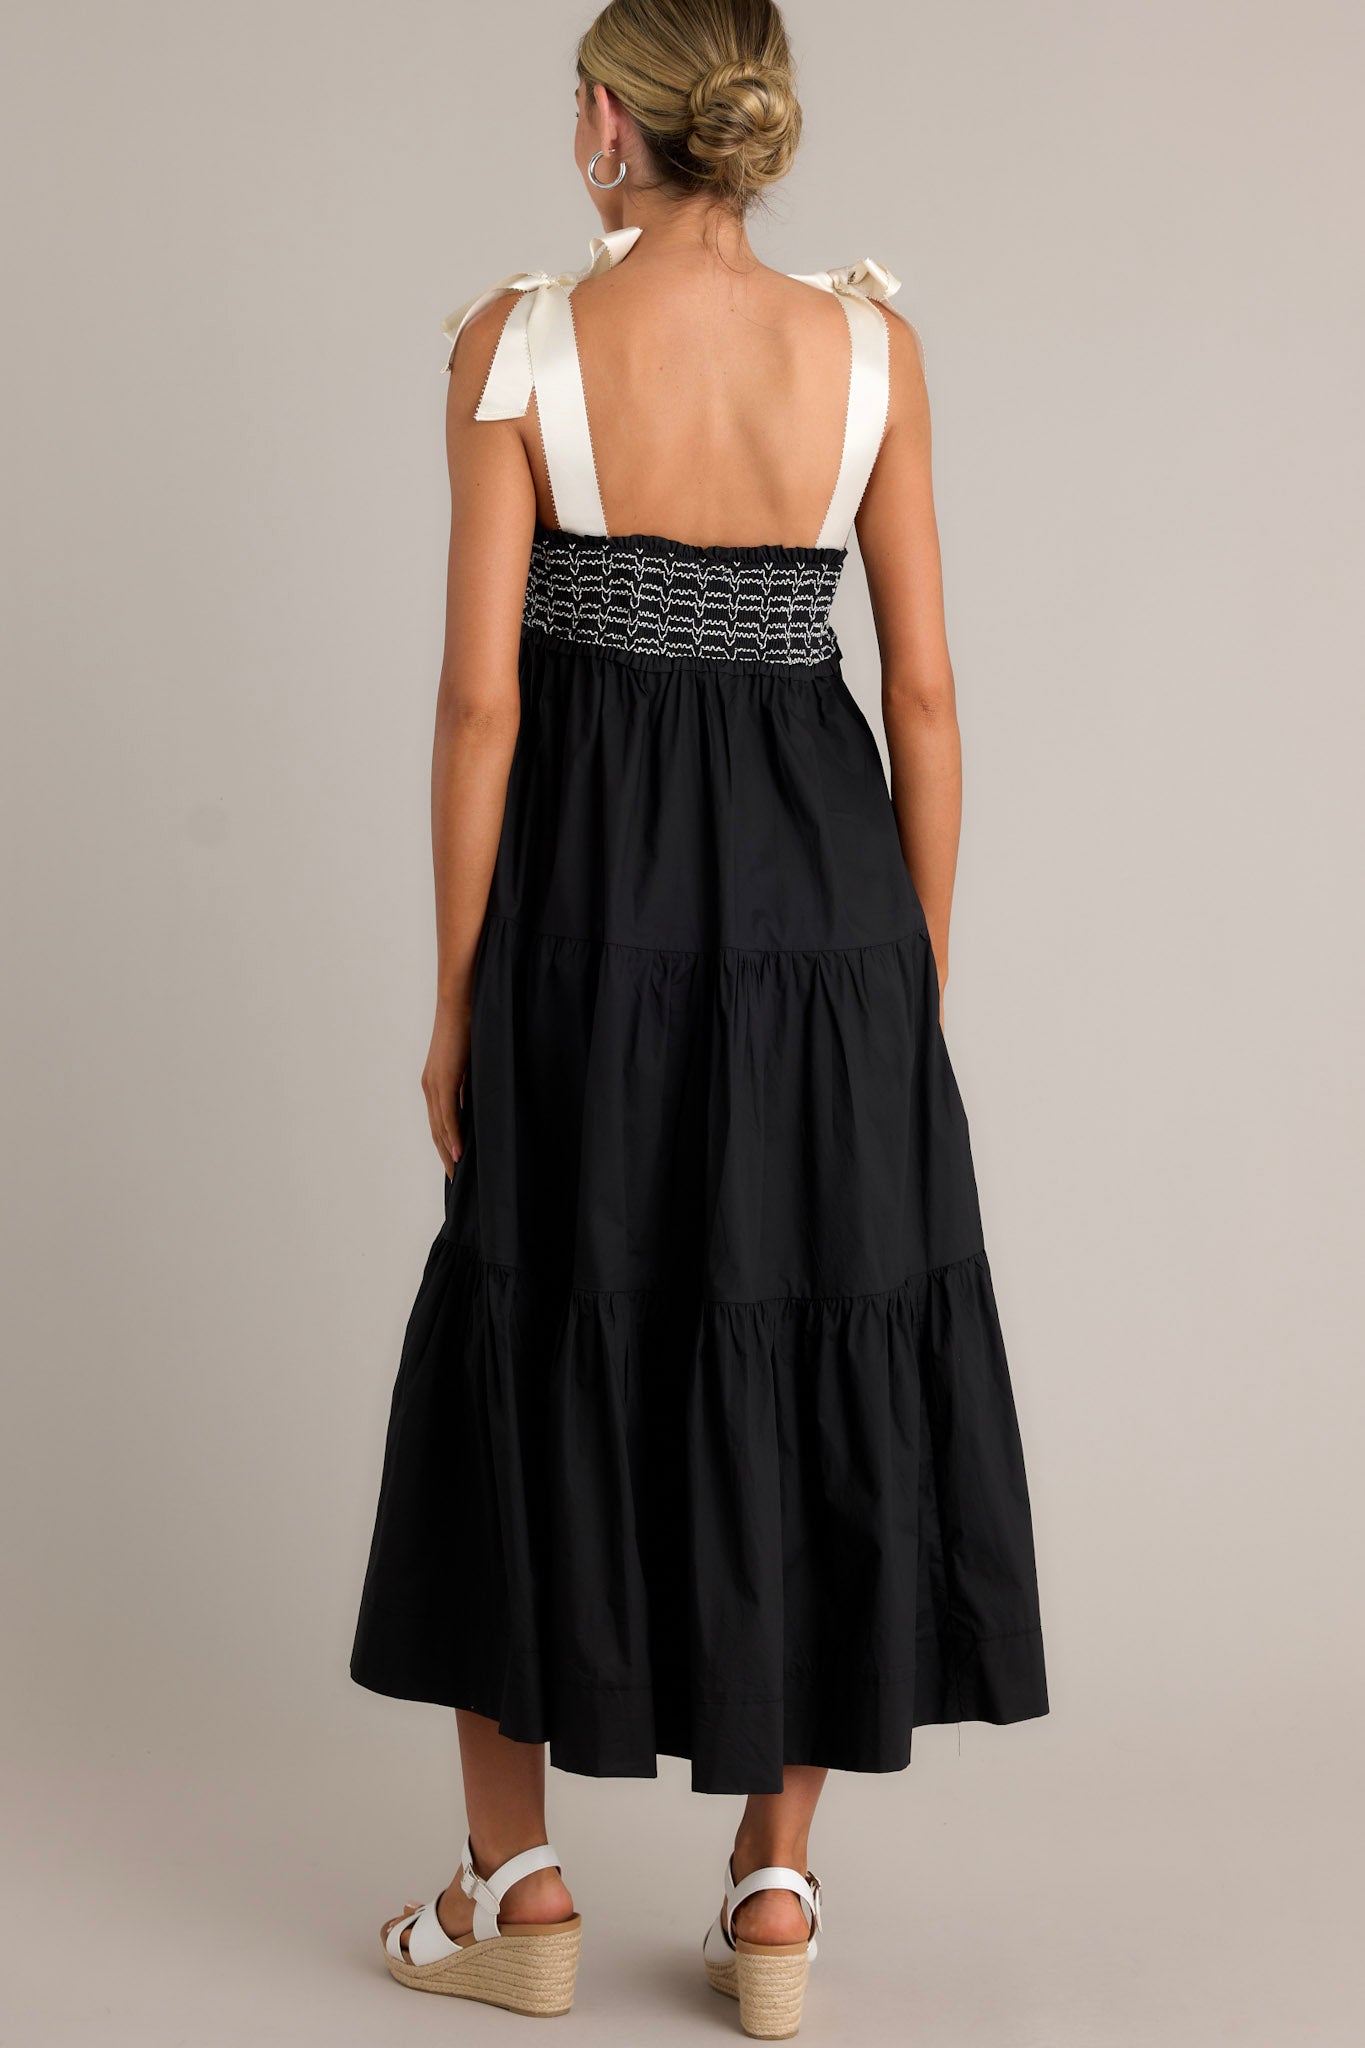 Back view of a black maxi dress highlighting the thick self-tie straps, fully smocked bodice, and overall fit.